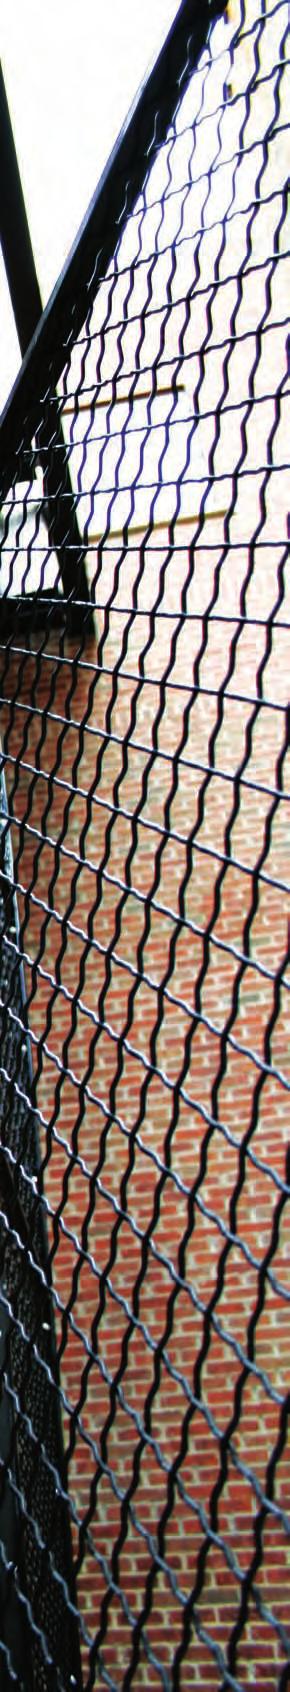 12-23 8 WIRE MESH PARTITIONS ALL WIRE TYPE No. 130AL Basic type for normal industrial use. SHEET BASE TYPE No. 139AL Special type for normal industrial use. TS / TECHNICAL SUPPORT SPECIFICATIONS No.